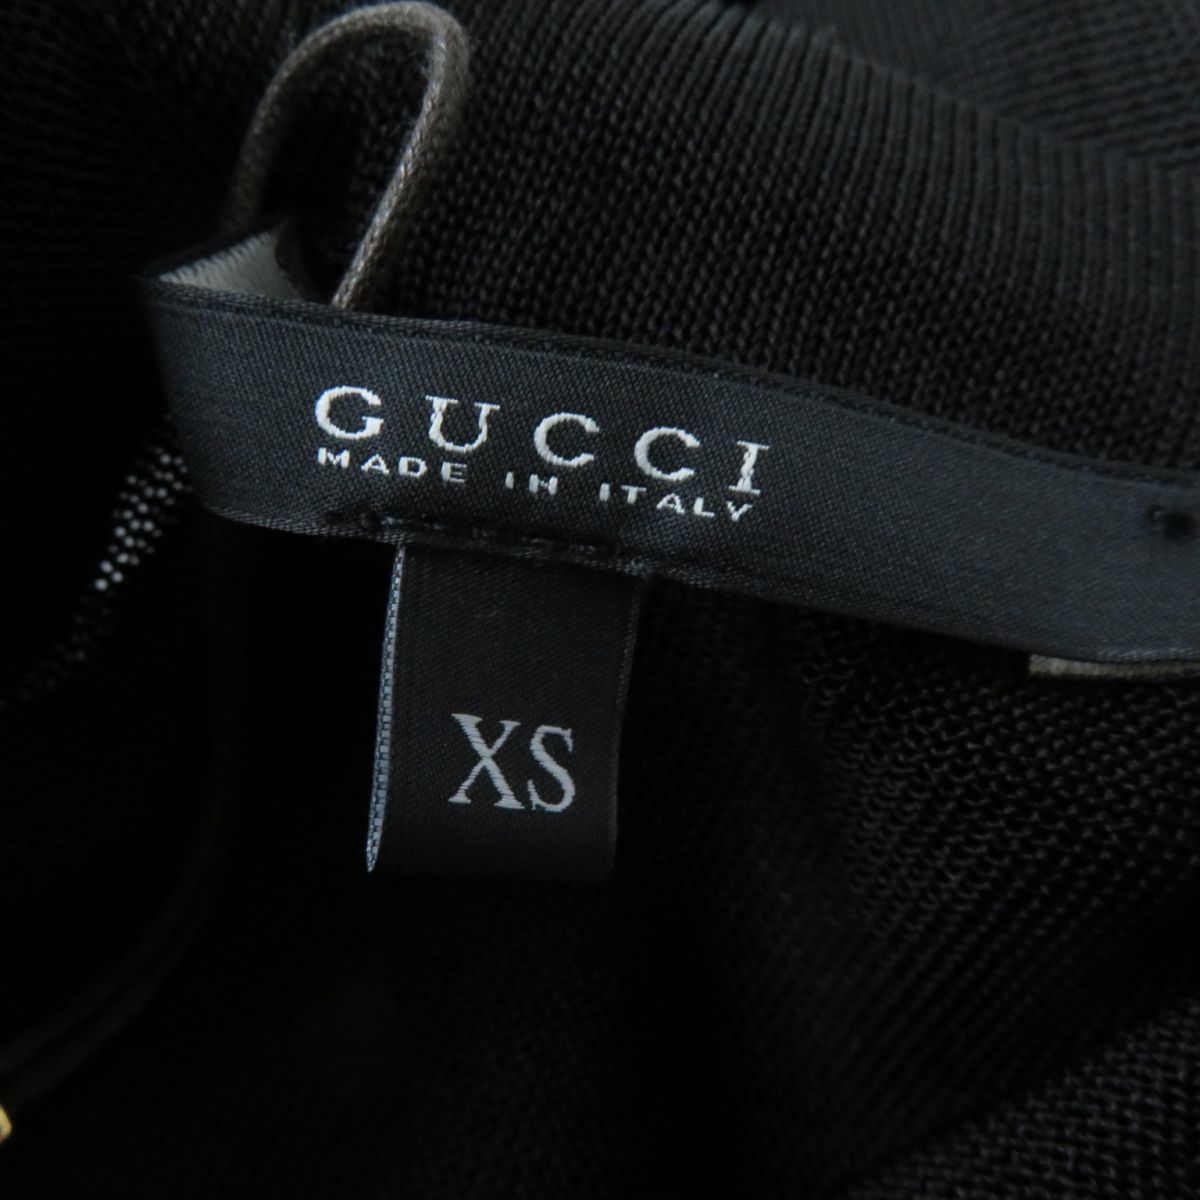  unused goods * regular goods GUCCI Gucci 297758 back ribbon design boat neck short sleeves tops black XS lady's Italy made tag attaching 